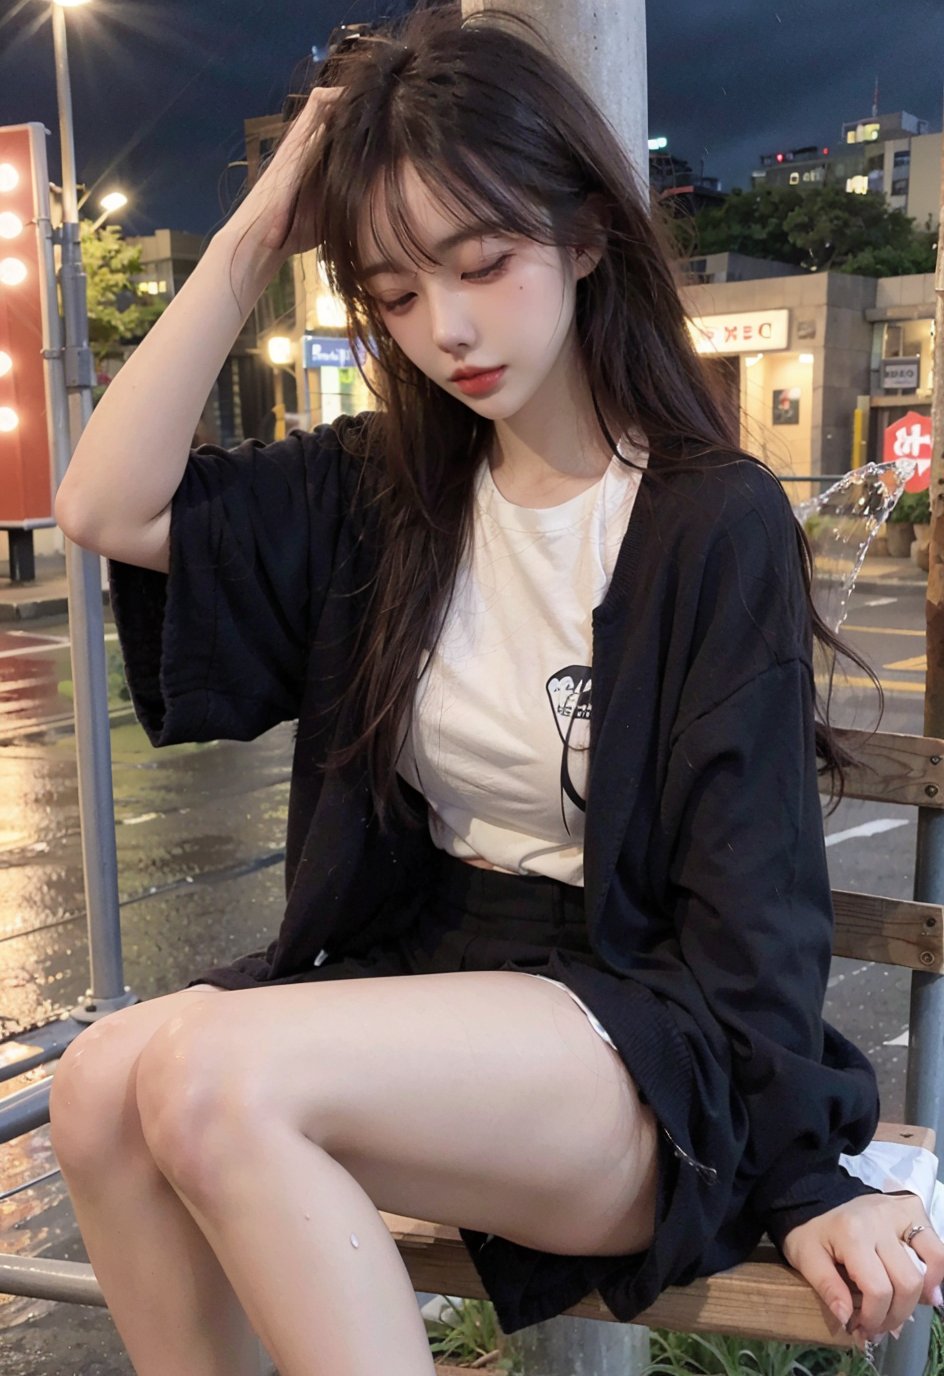 Sitting on a bench with one arm resting on the backrest, \nschool uniform, clothing, misfortune, looking down with disdain, underwear, low angle, on the streets of a city at night, rainy night, wet street, (wet clothes:1.1), wet hair, wet skin, perspective, neon, stream, falling rain, Disheveled hair, disheveled clothes, half-closed eyes, waiting, jessy.